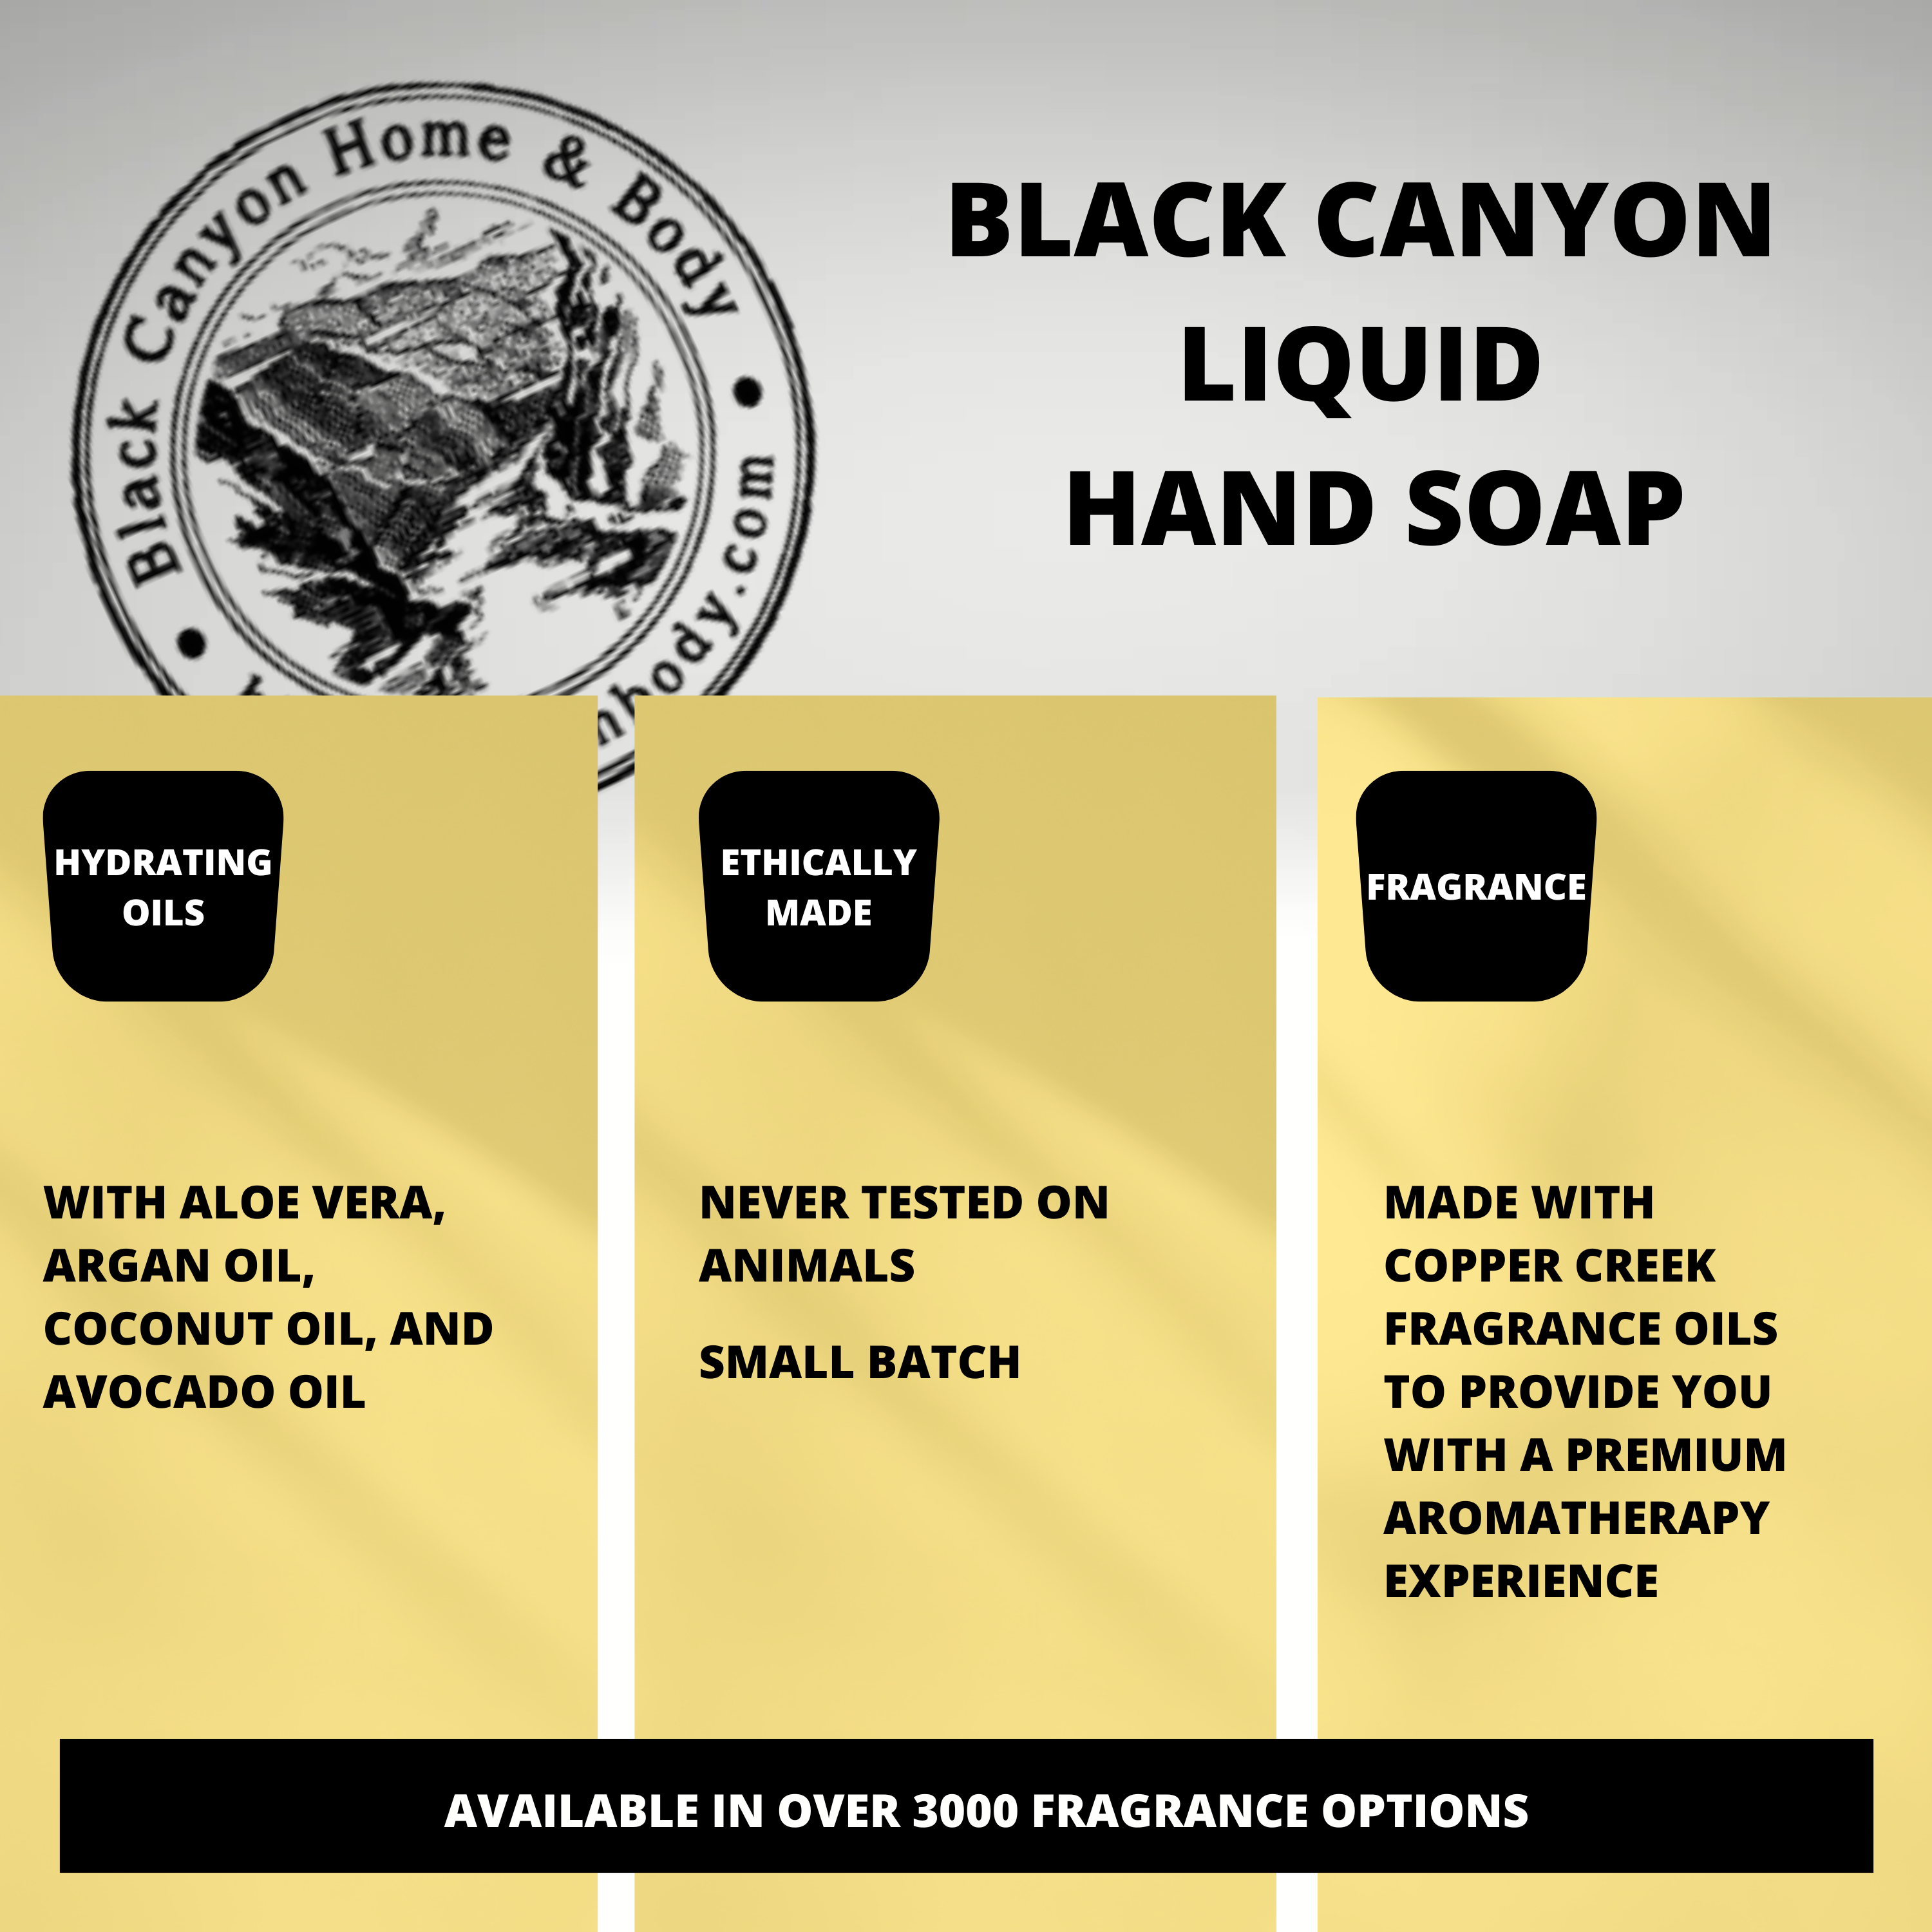 Black Canyon Juicy Green Apple & Lychee Scented Liquid Hand Soap